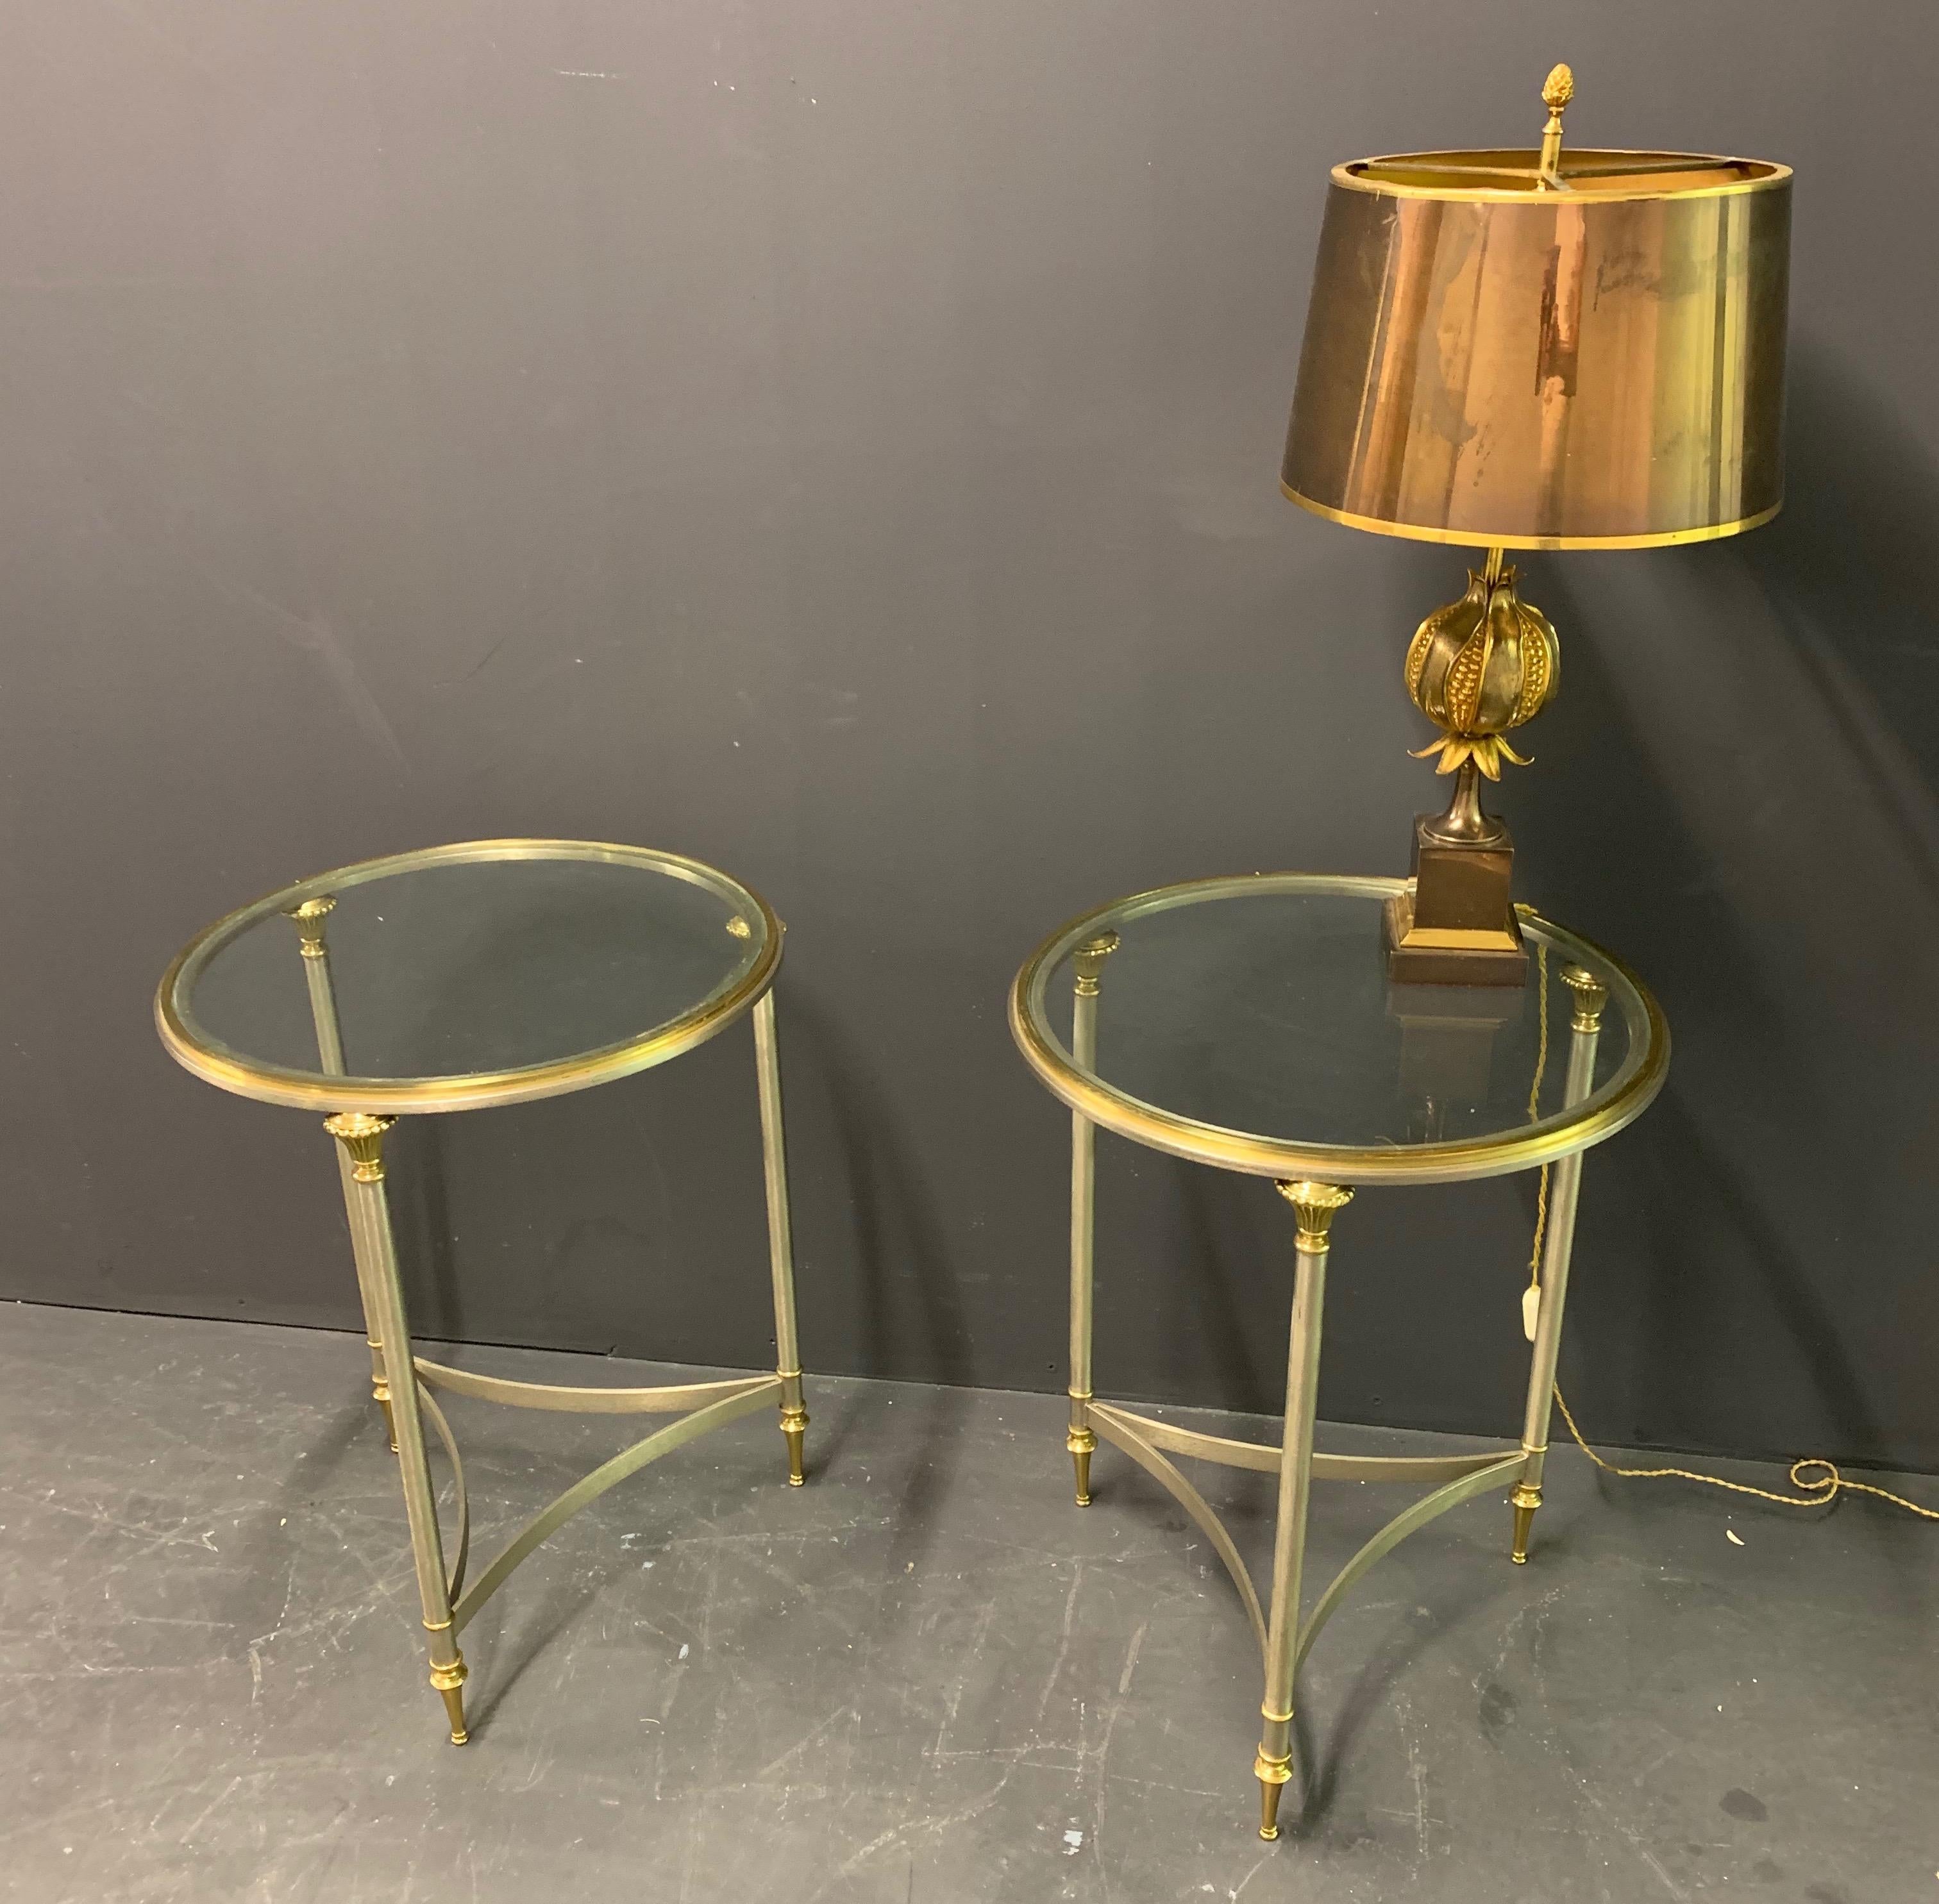 Very rare pieces of furniture in very good condition. Steel and brass.

we can offer a few different pieces of the directoire range.